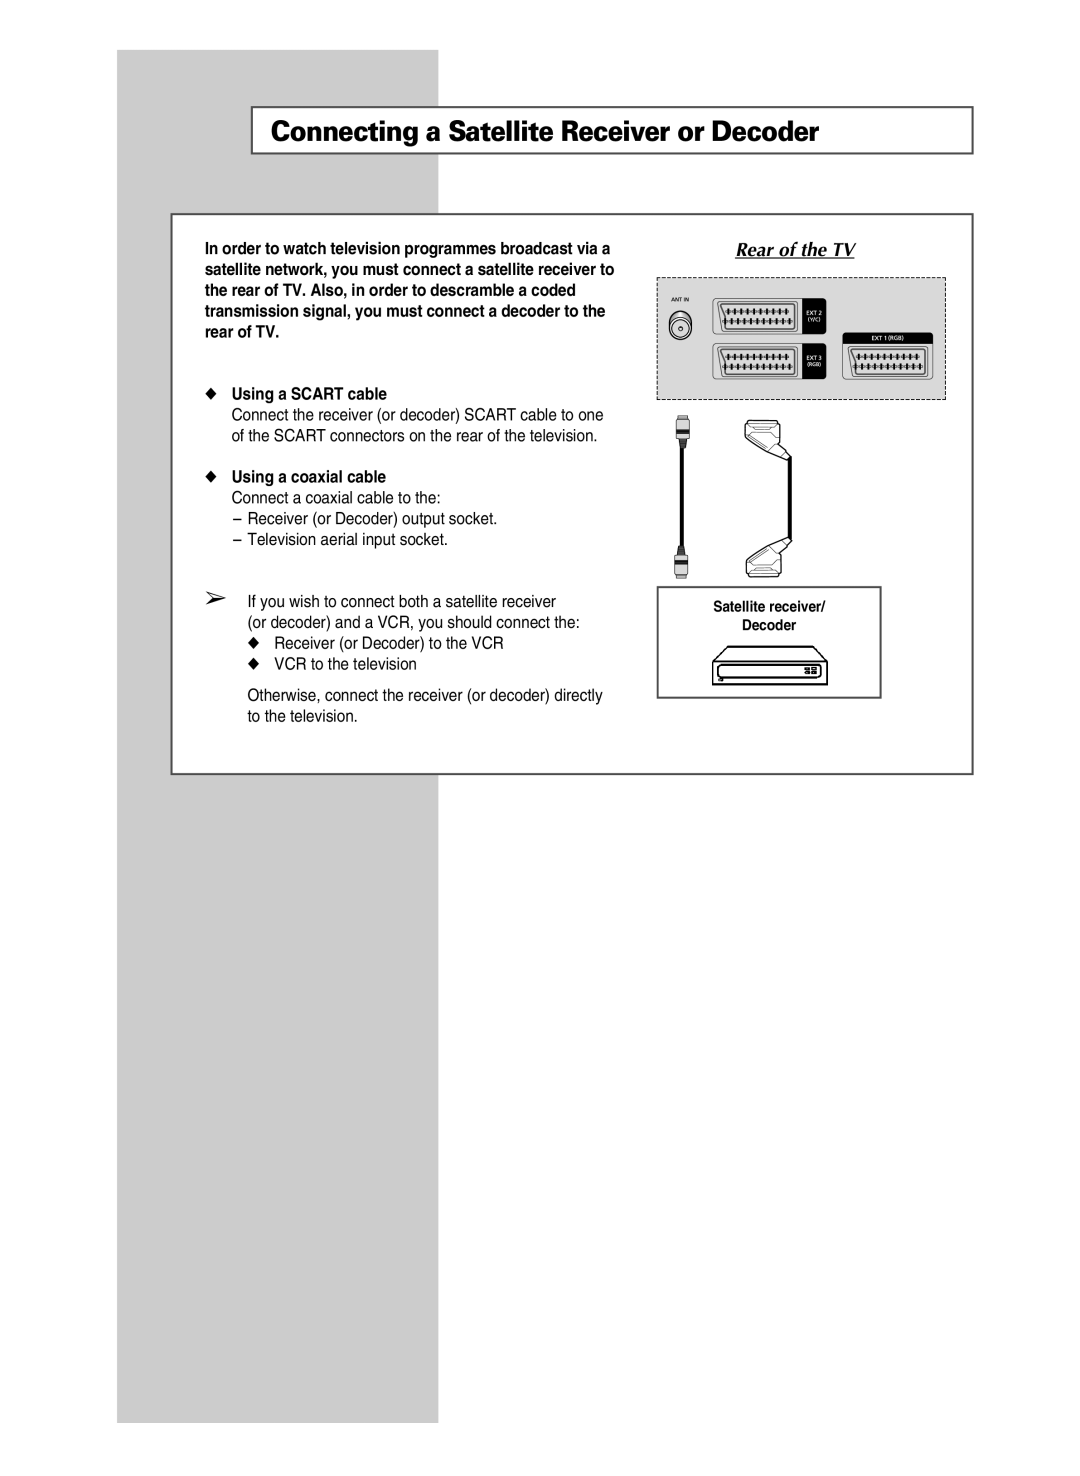 Samsung SP-43R1HL manual Connecting a Satellite Receiver or Decoder, Rear of the TV 